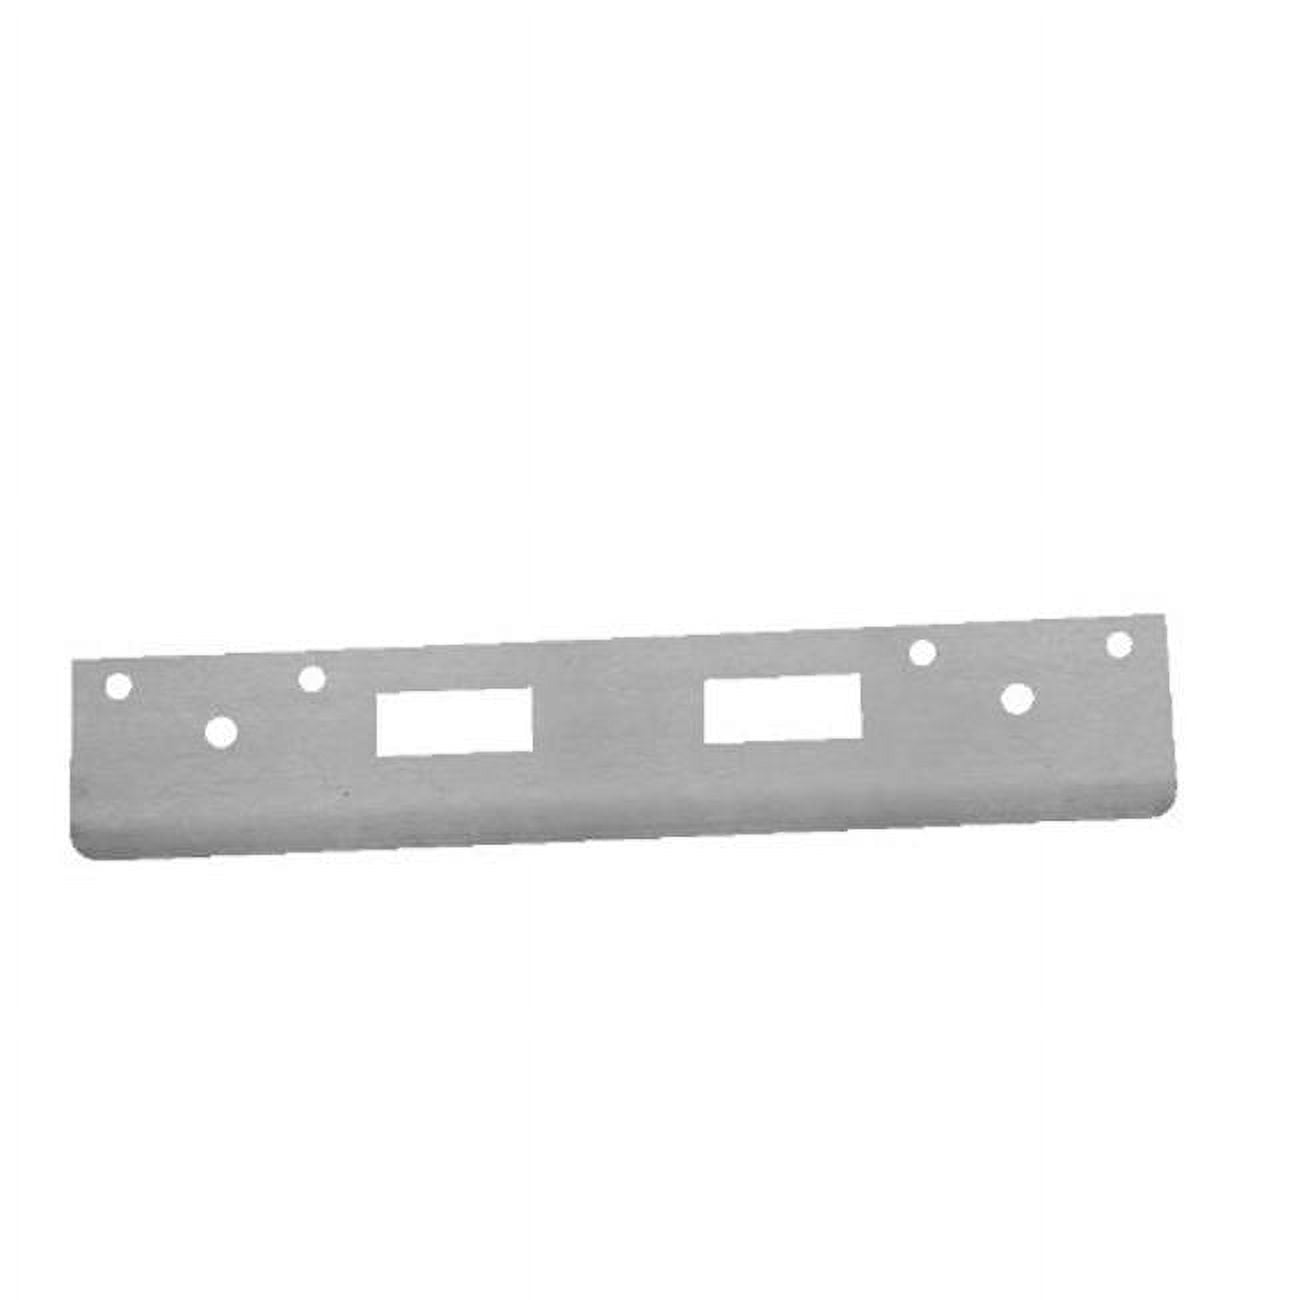 Fl 212w6 -bp 12 In. Full Lip High Security Strike With 6 In. Ctc Latch Holes, Brass Plated